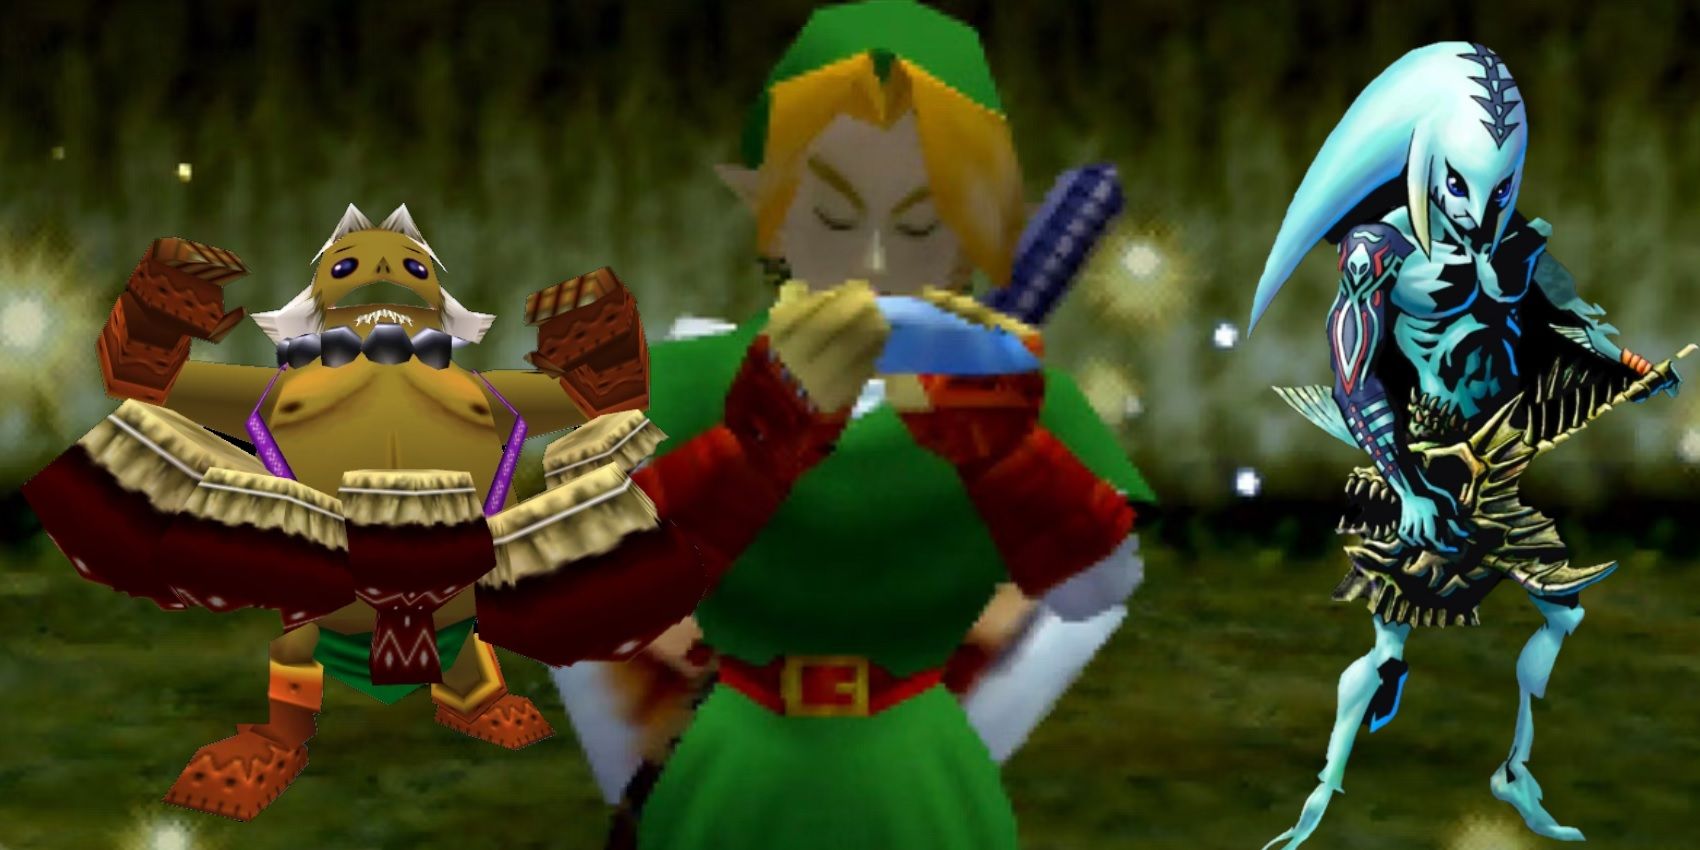 Ocarina of Time and other Zelda games prove Link is a musical genius.